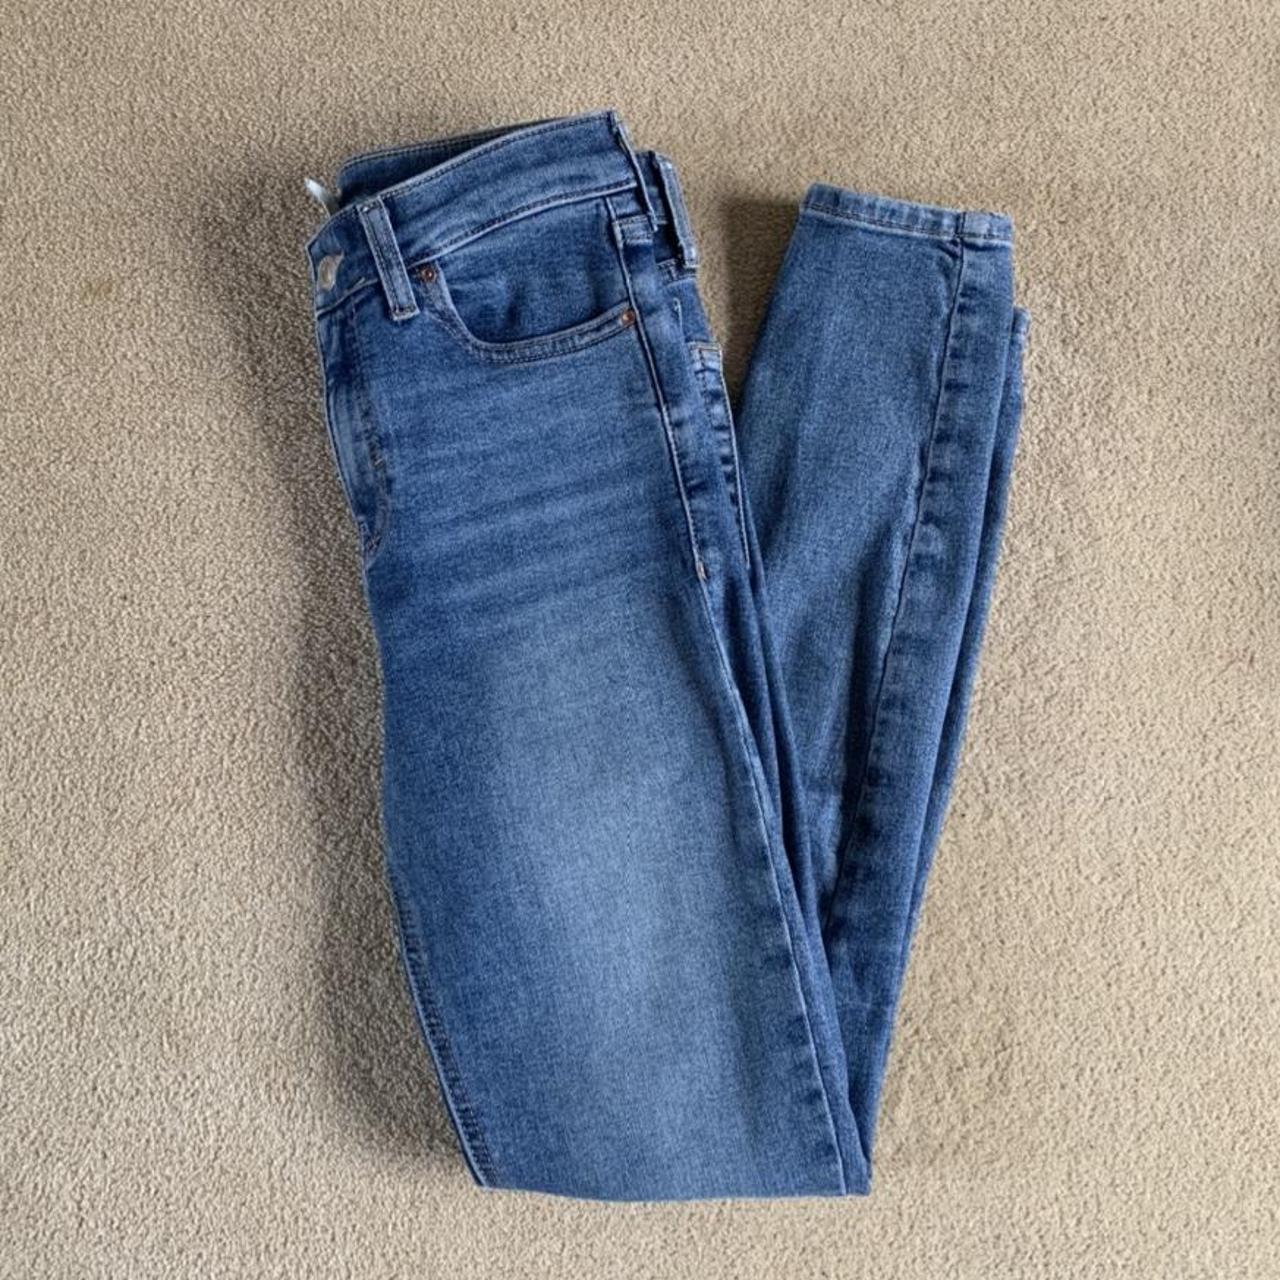 Topshop Jamie Jeans W25 L32 High Waisted Worn but... - Depop